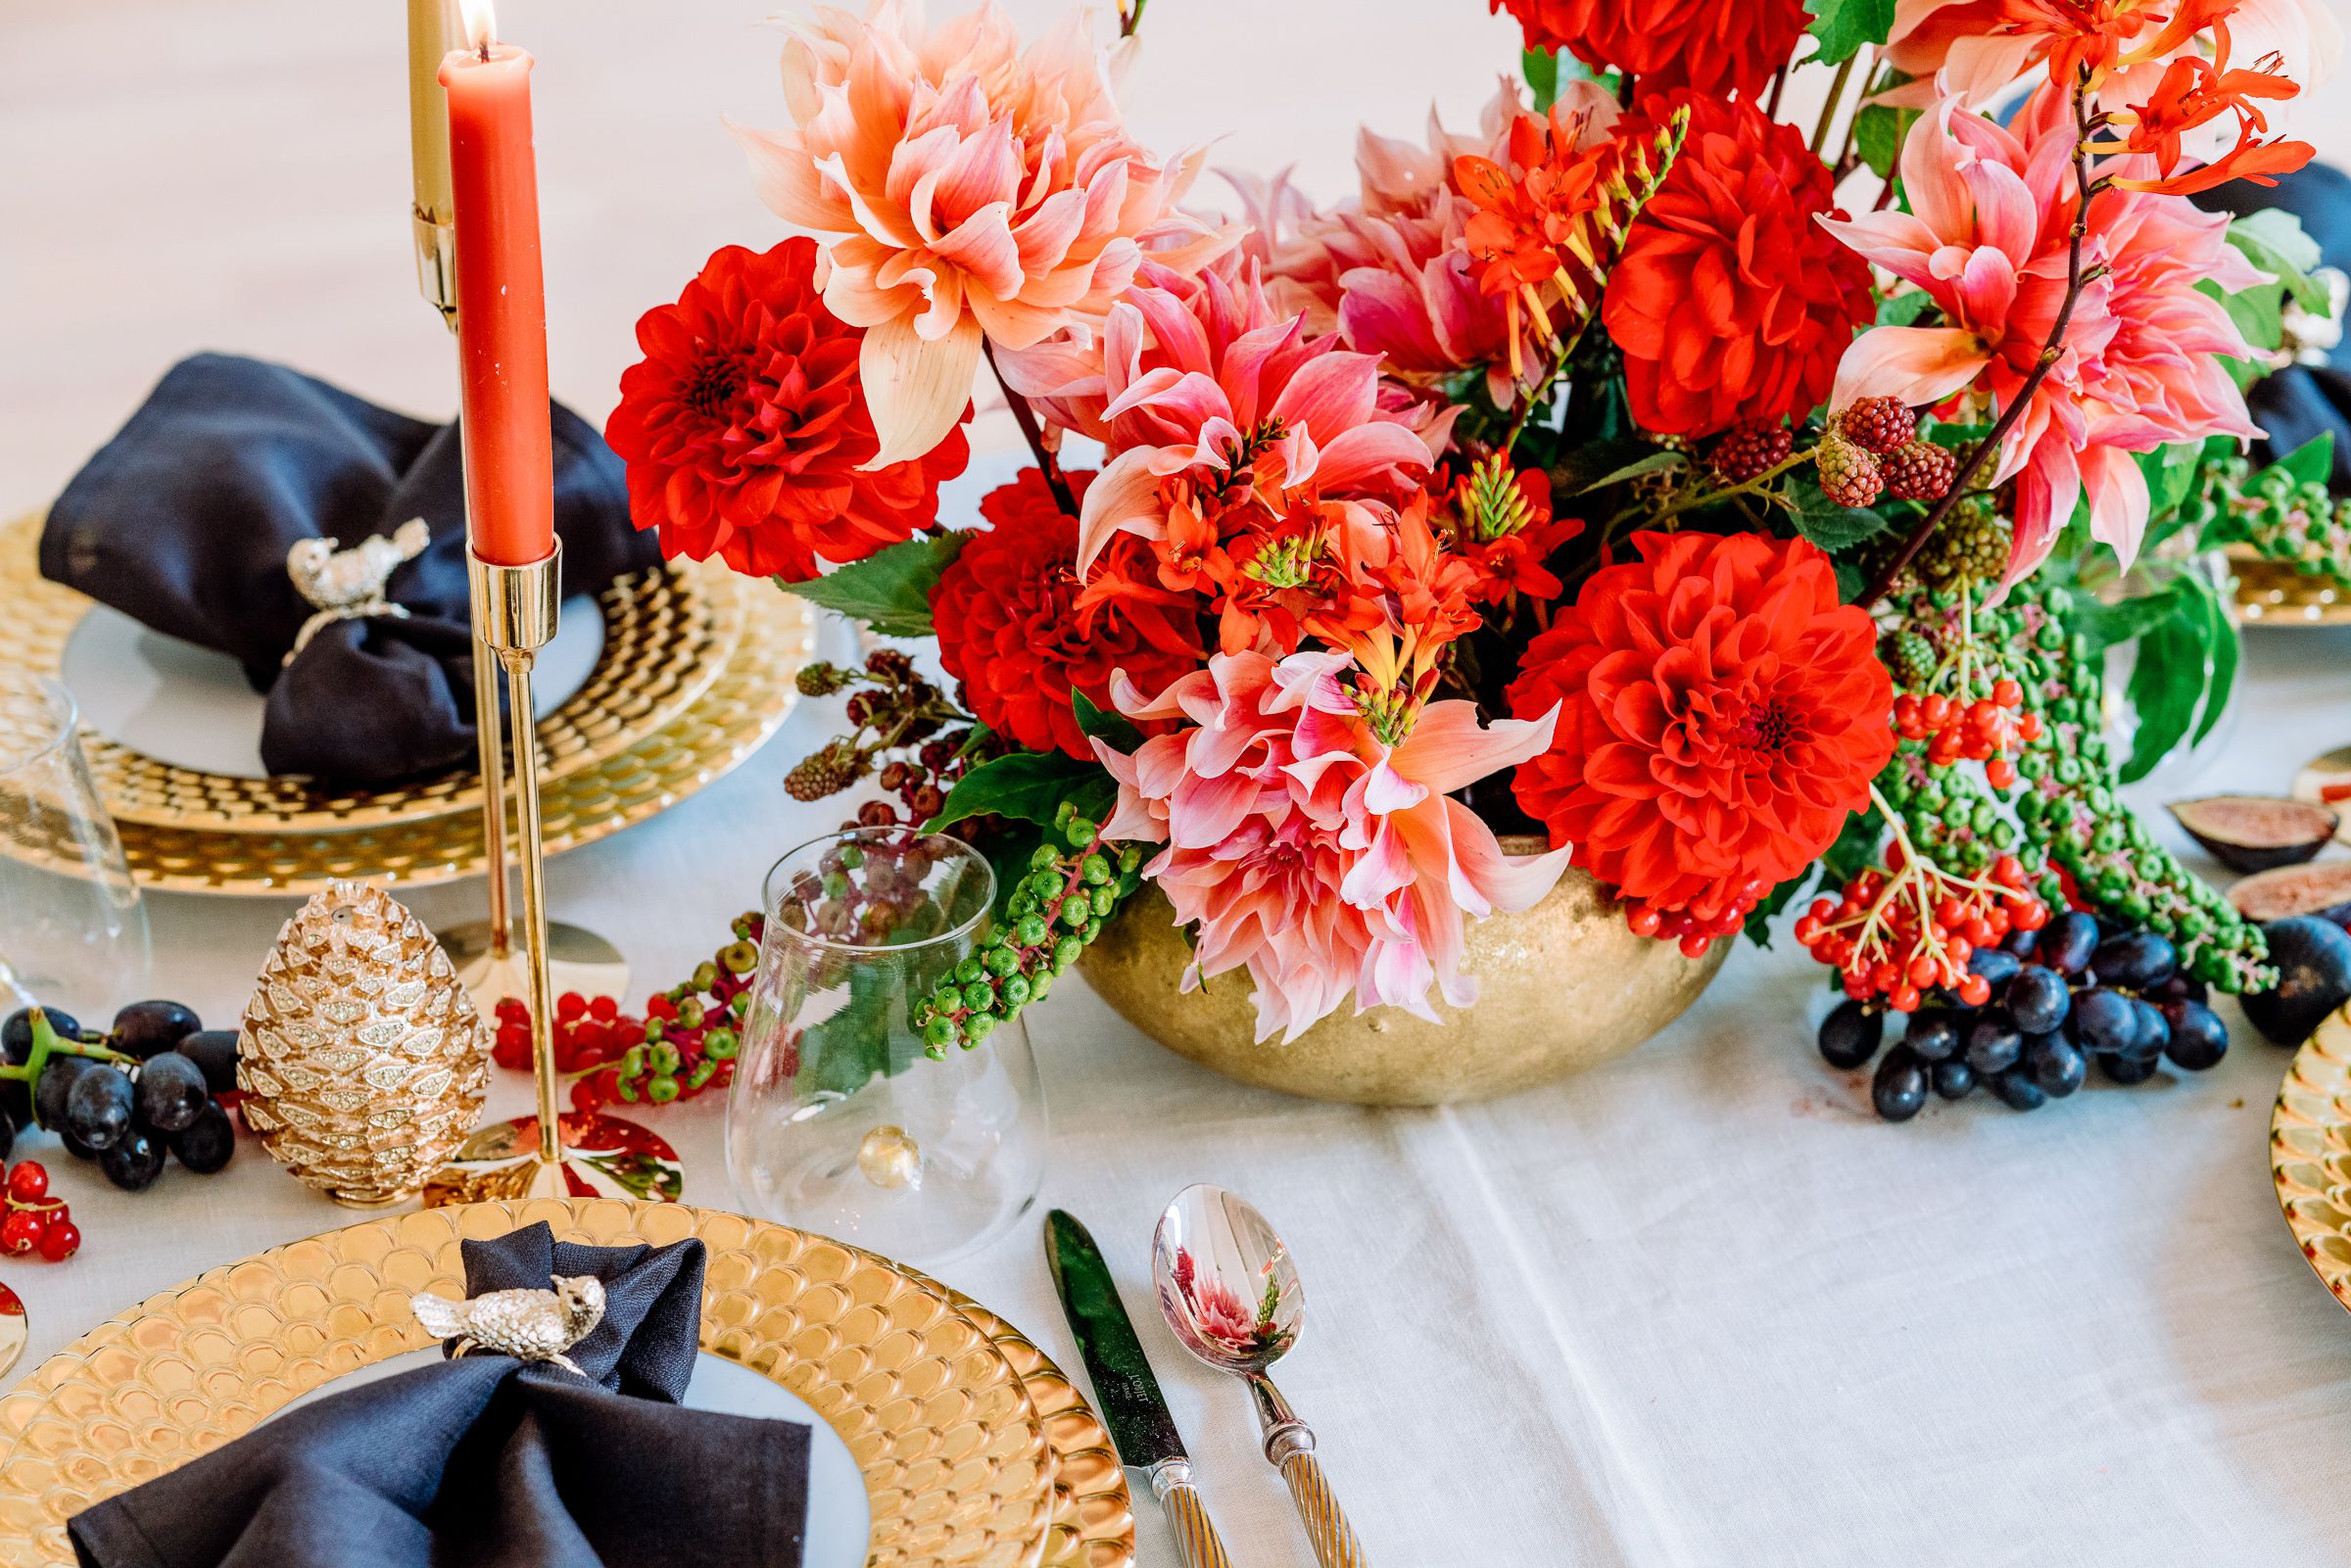 Designer-Approved Tablescapes for All Your Autumn Gatherings